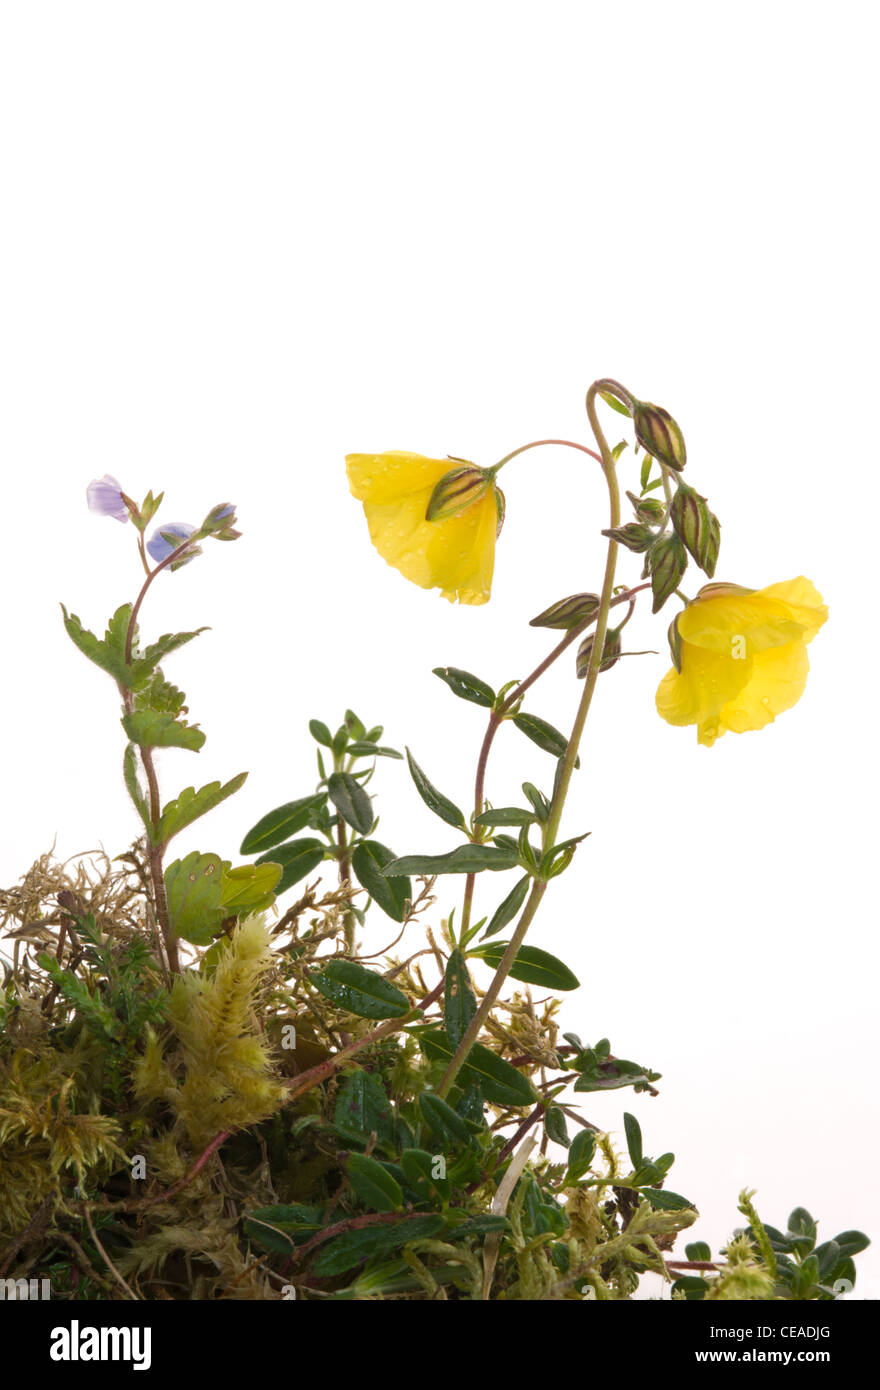 Common Rock Rose and Germander Speedwell Stock Photo